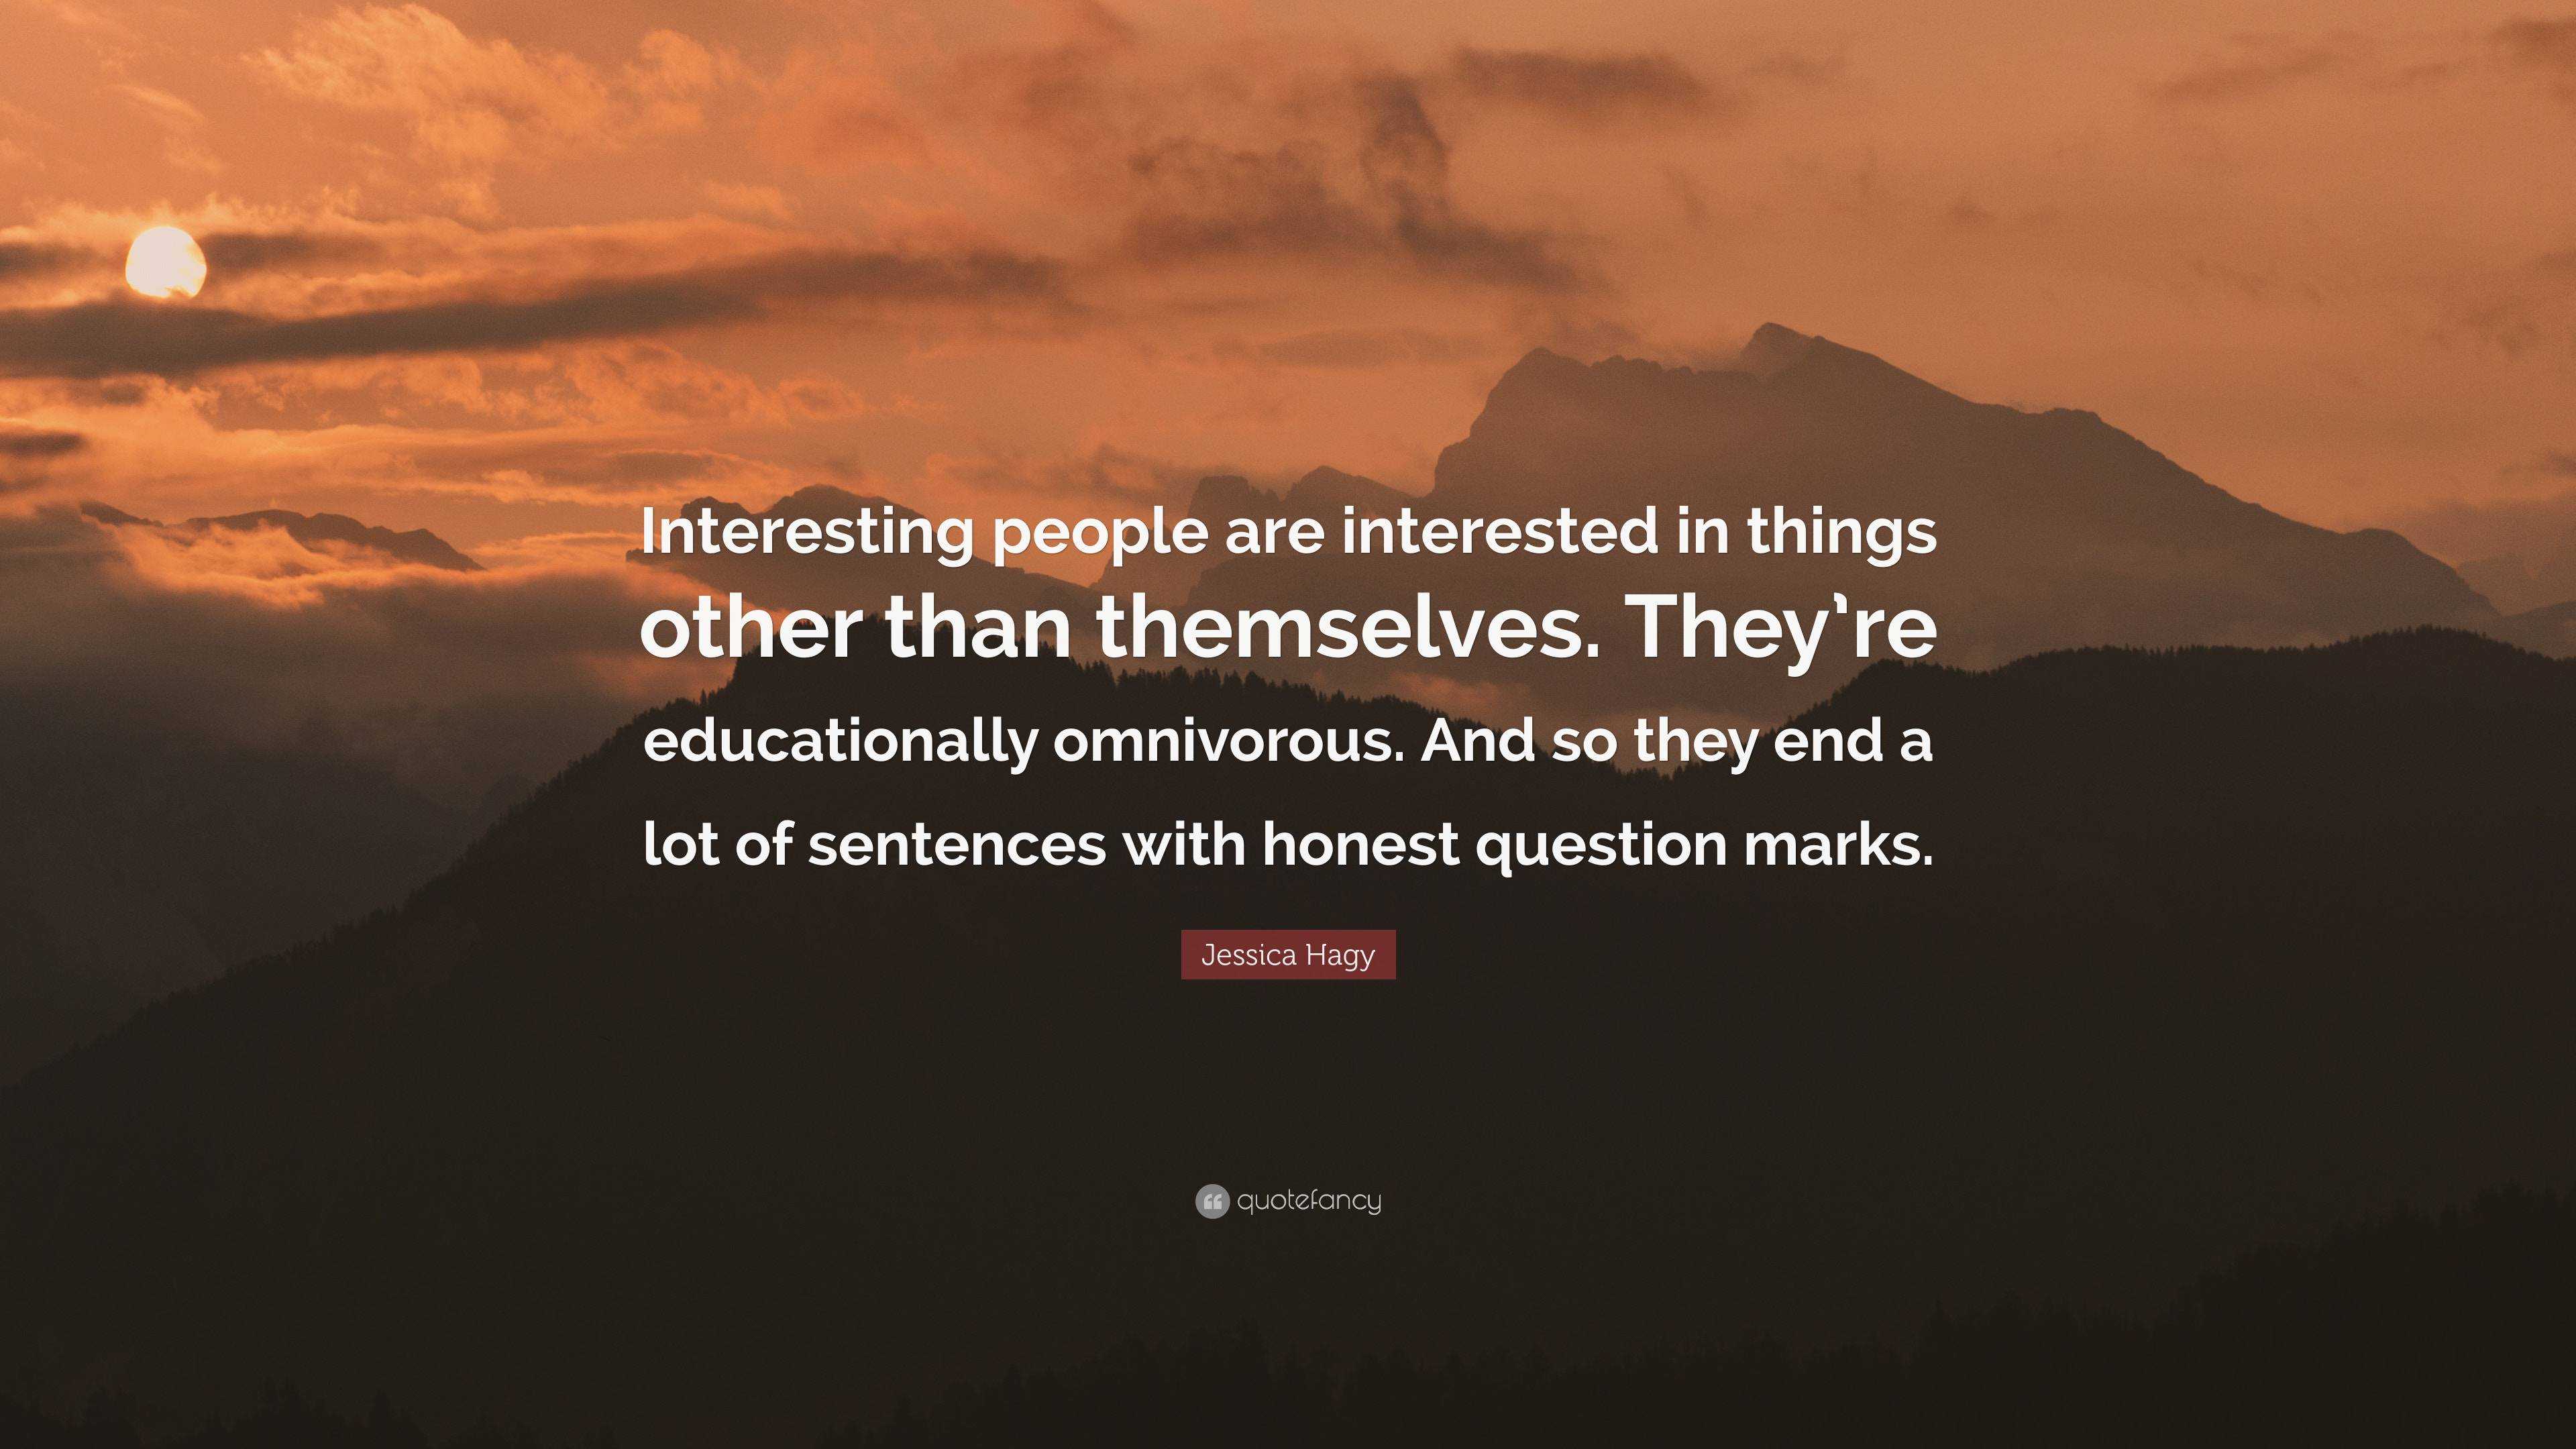 Jessica Hagy Quote: “Interesting people are interested in things other ...